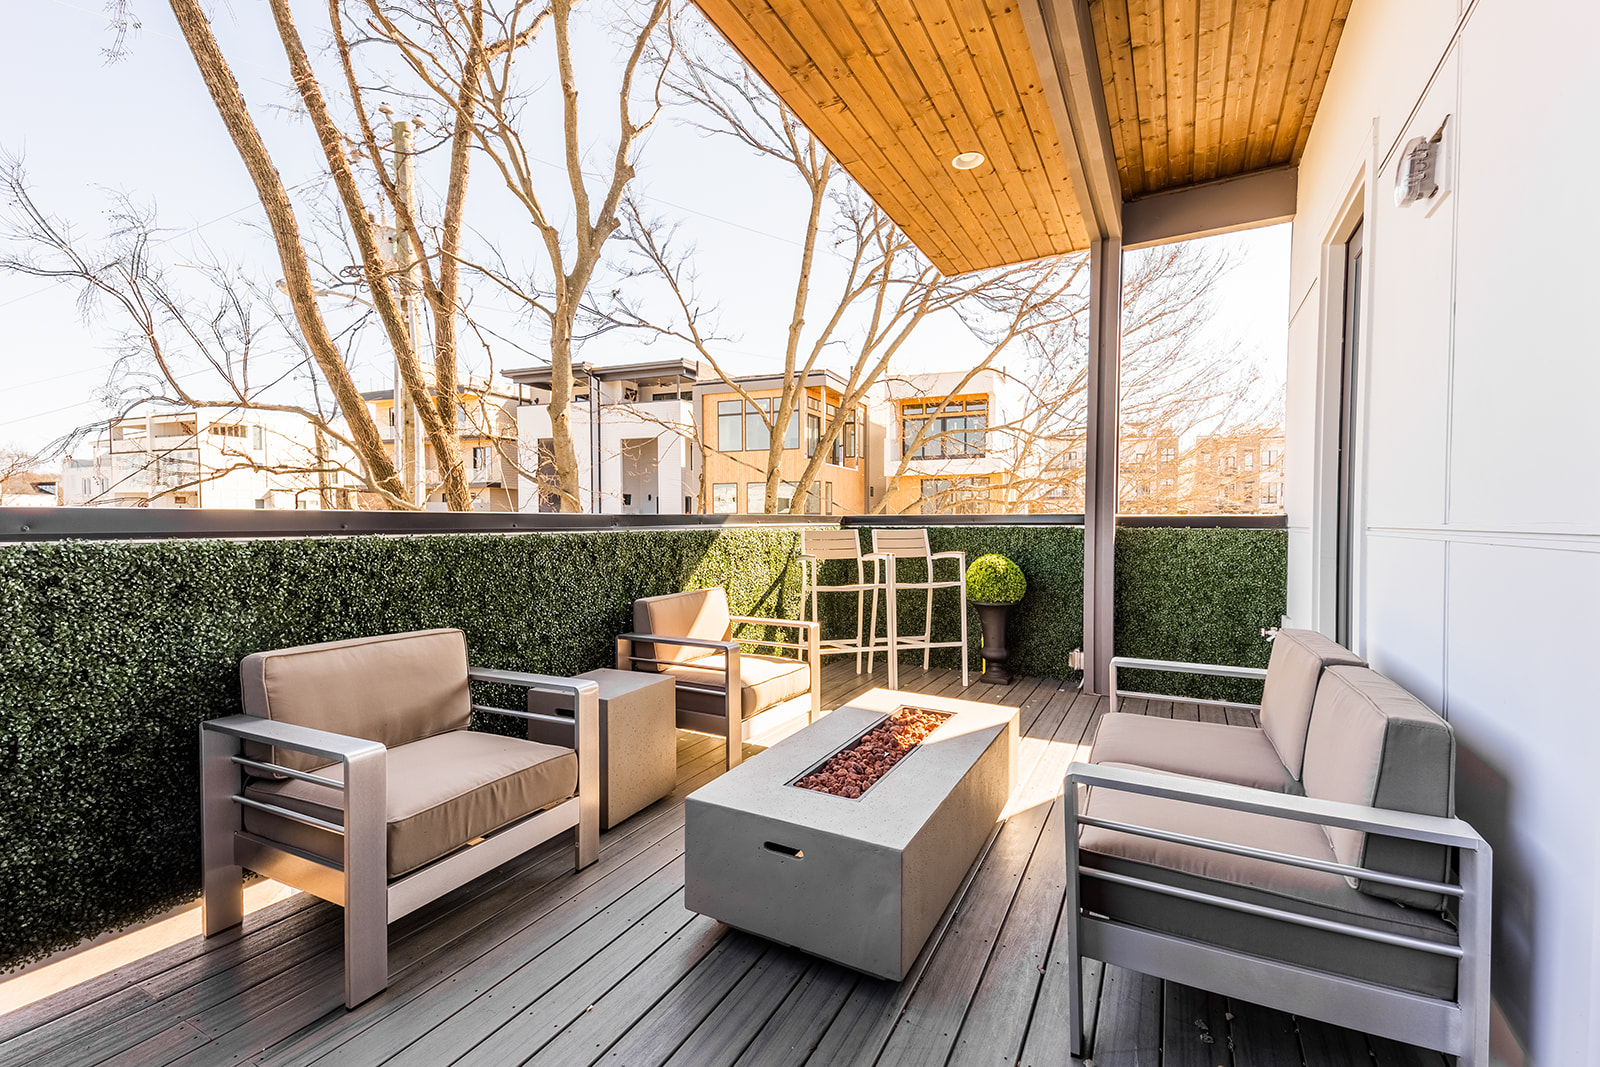 Private rooftop patio with outdoor dining, fire pit, and surrounding seating.